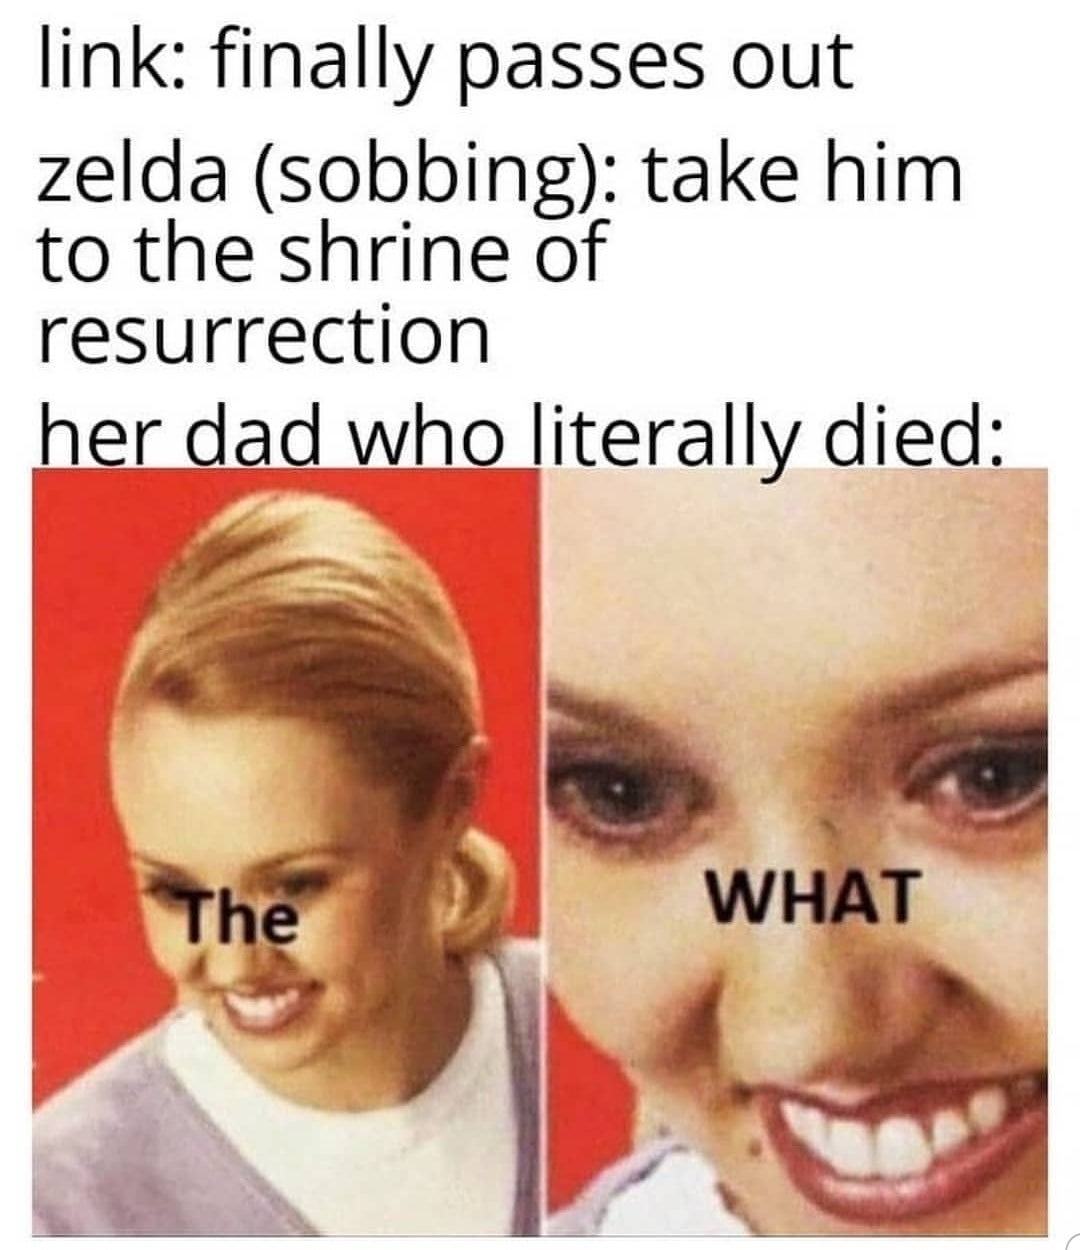 ww3 florida man meme - link finally passes out zelda sobbing take him to the shrine of resurrection her dad who literally died The What